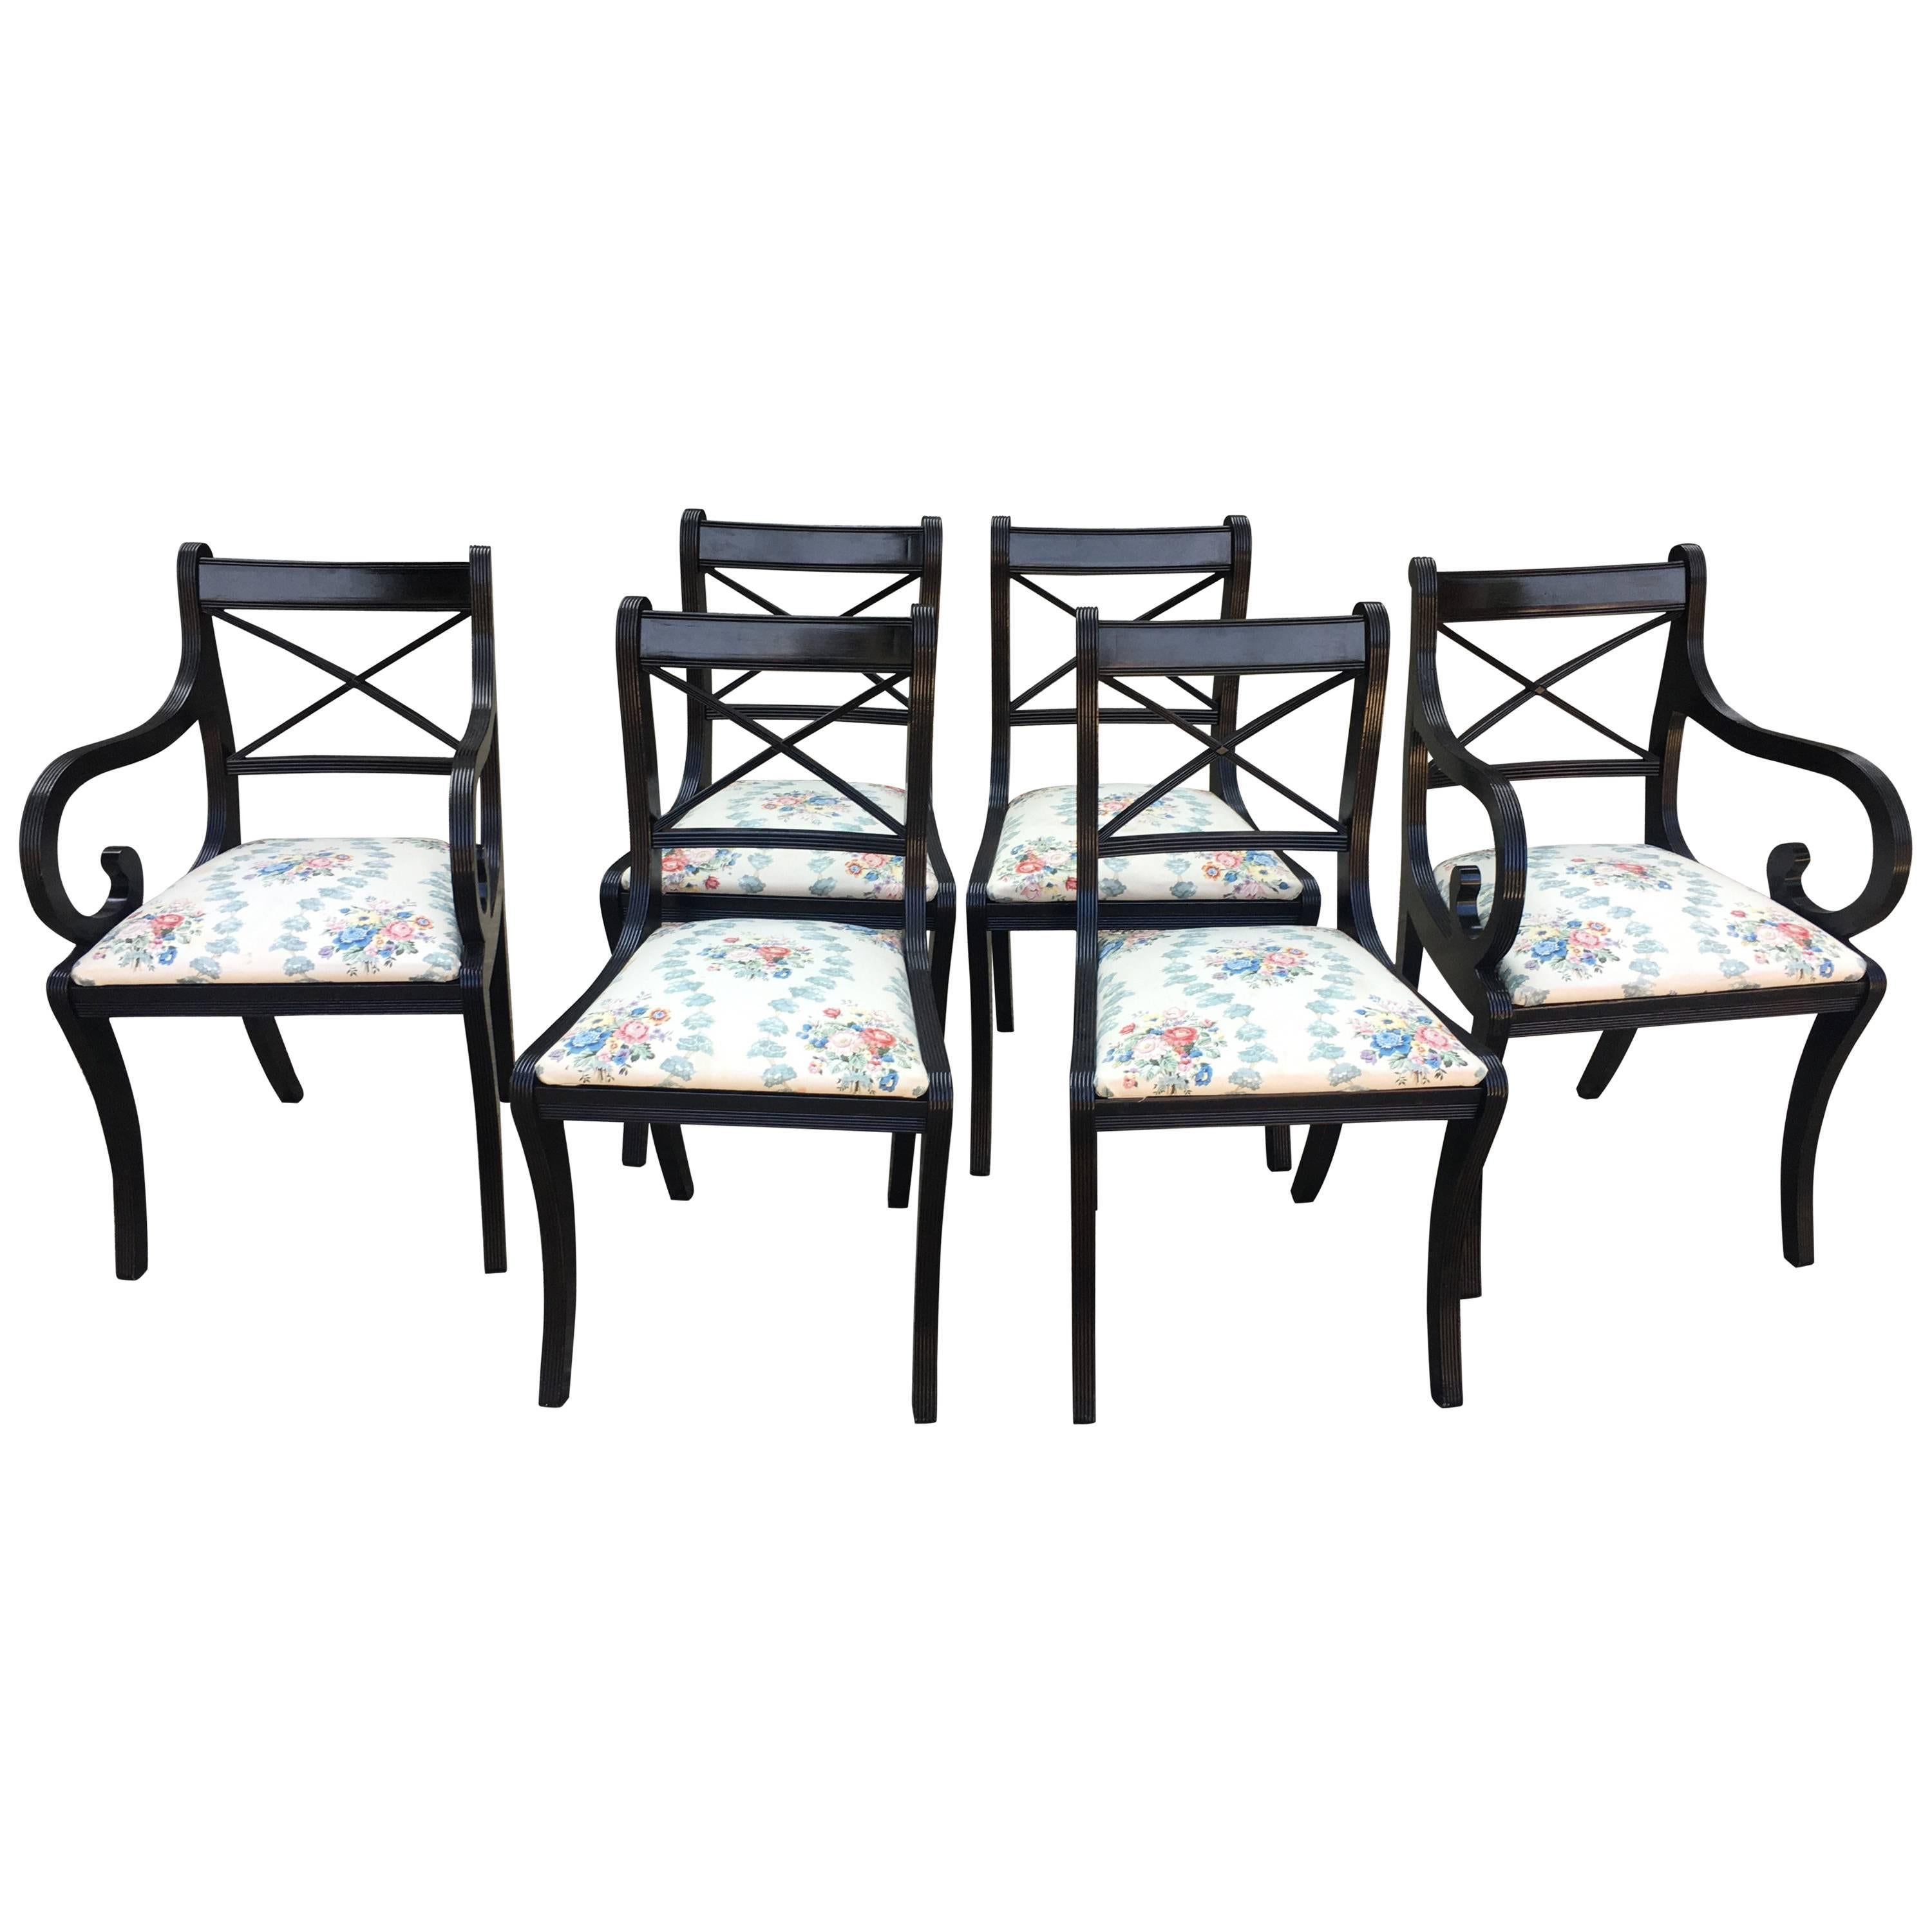 English Set of Six Regency Ebonized Chairs with Floral Fabric Seat from 1860s For Sale